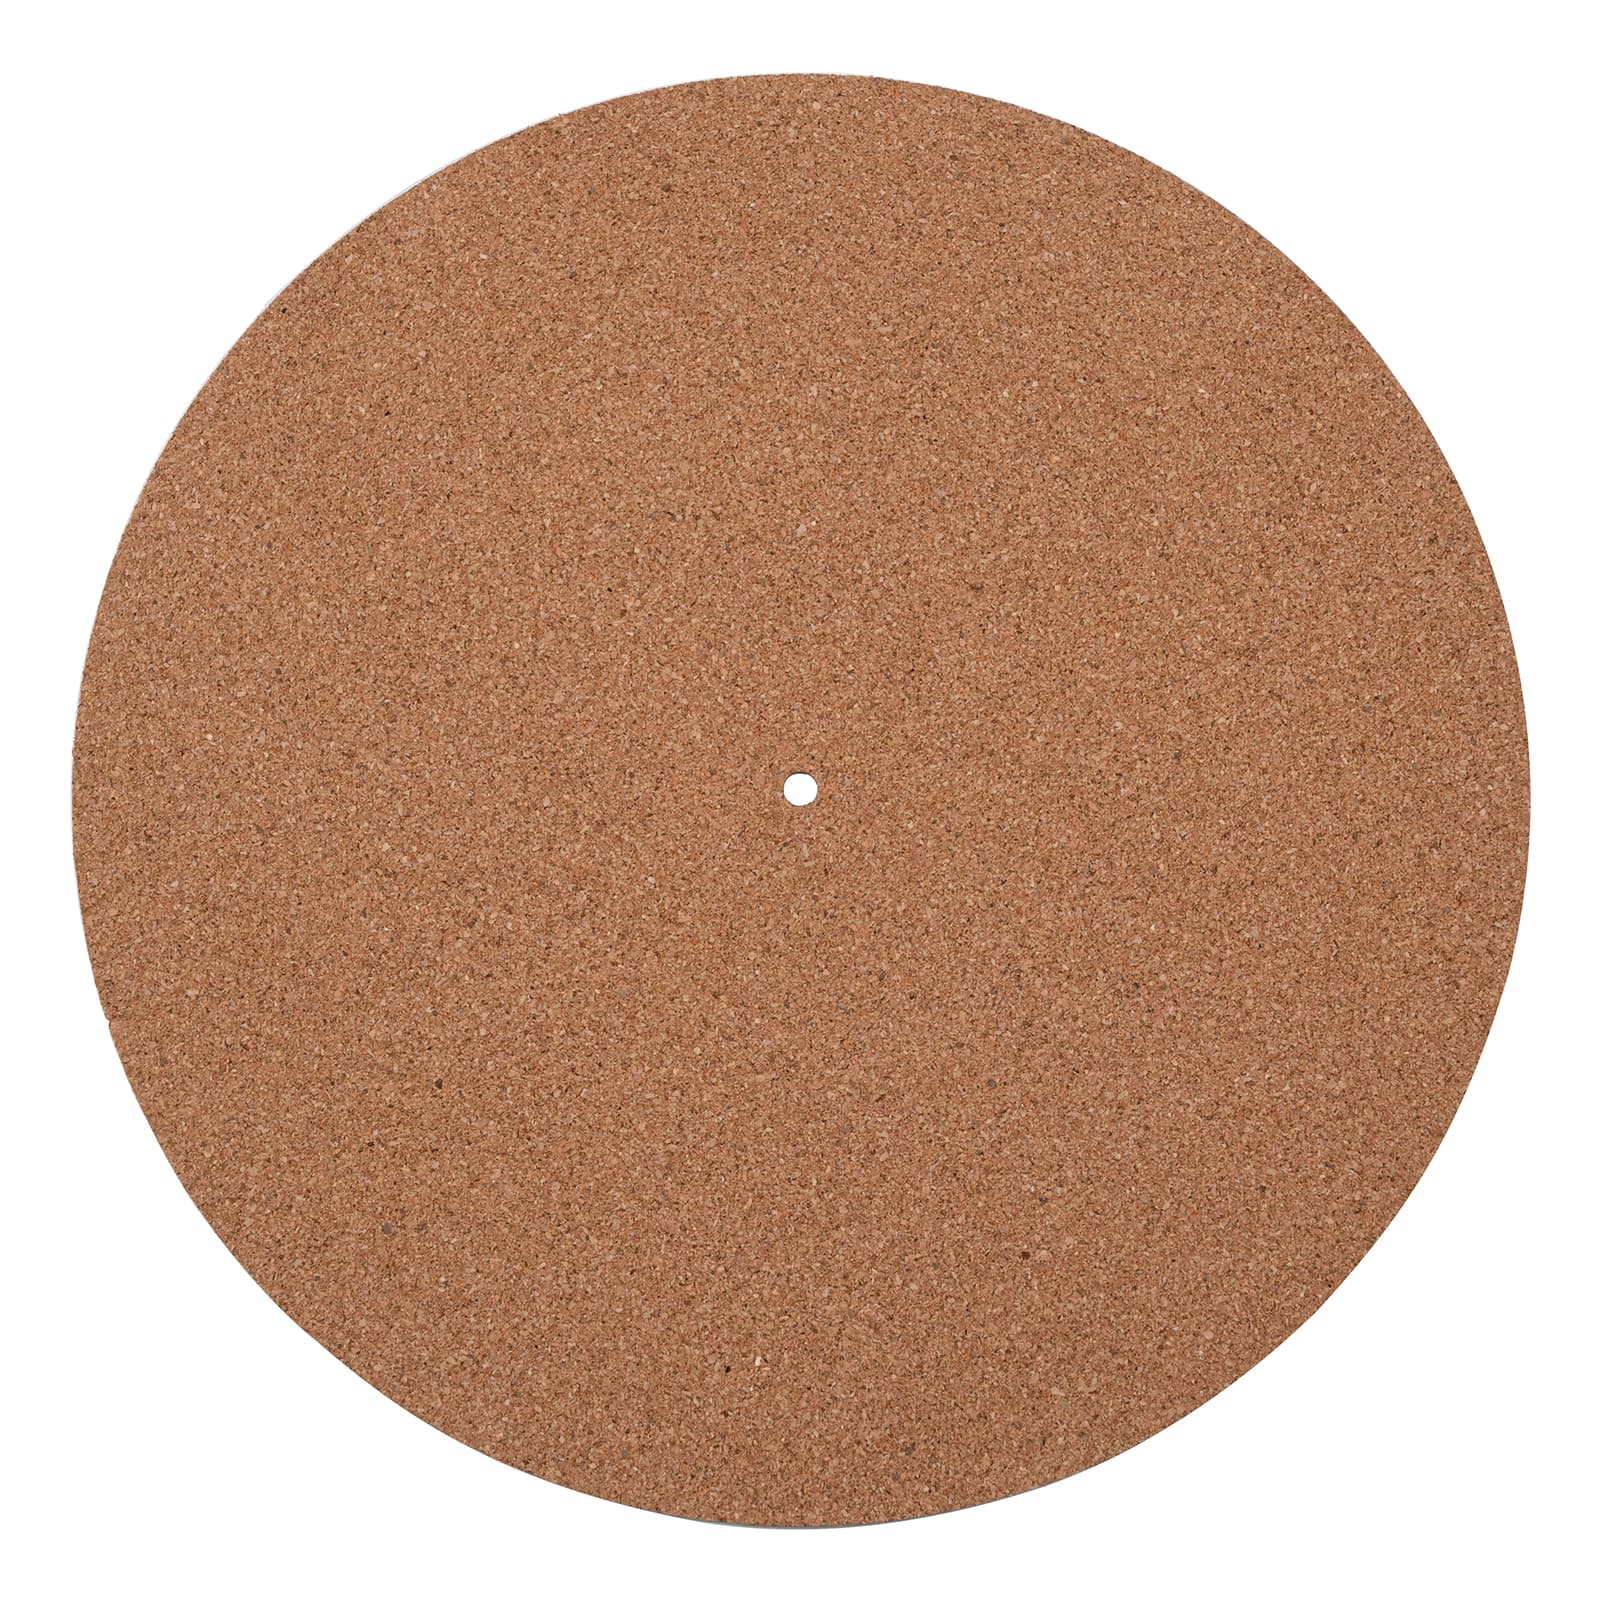 Audio Keeper Replacement 3mm Cork Turntable Mat